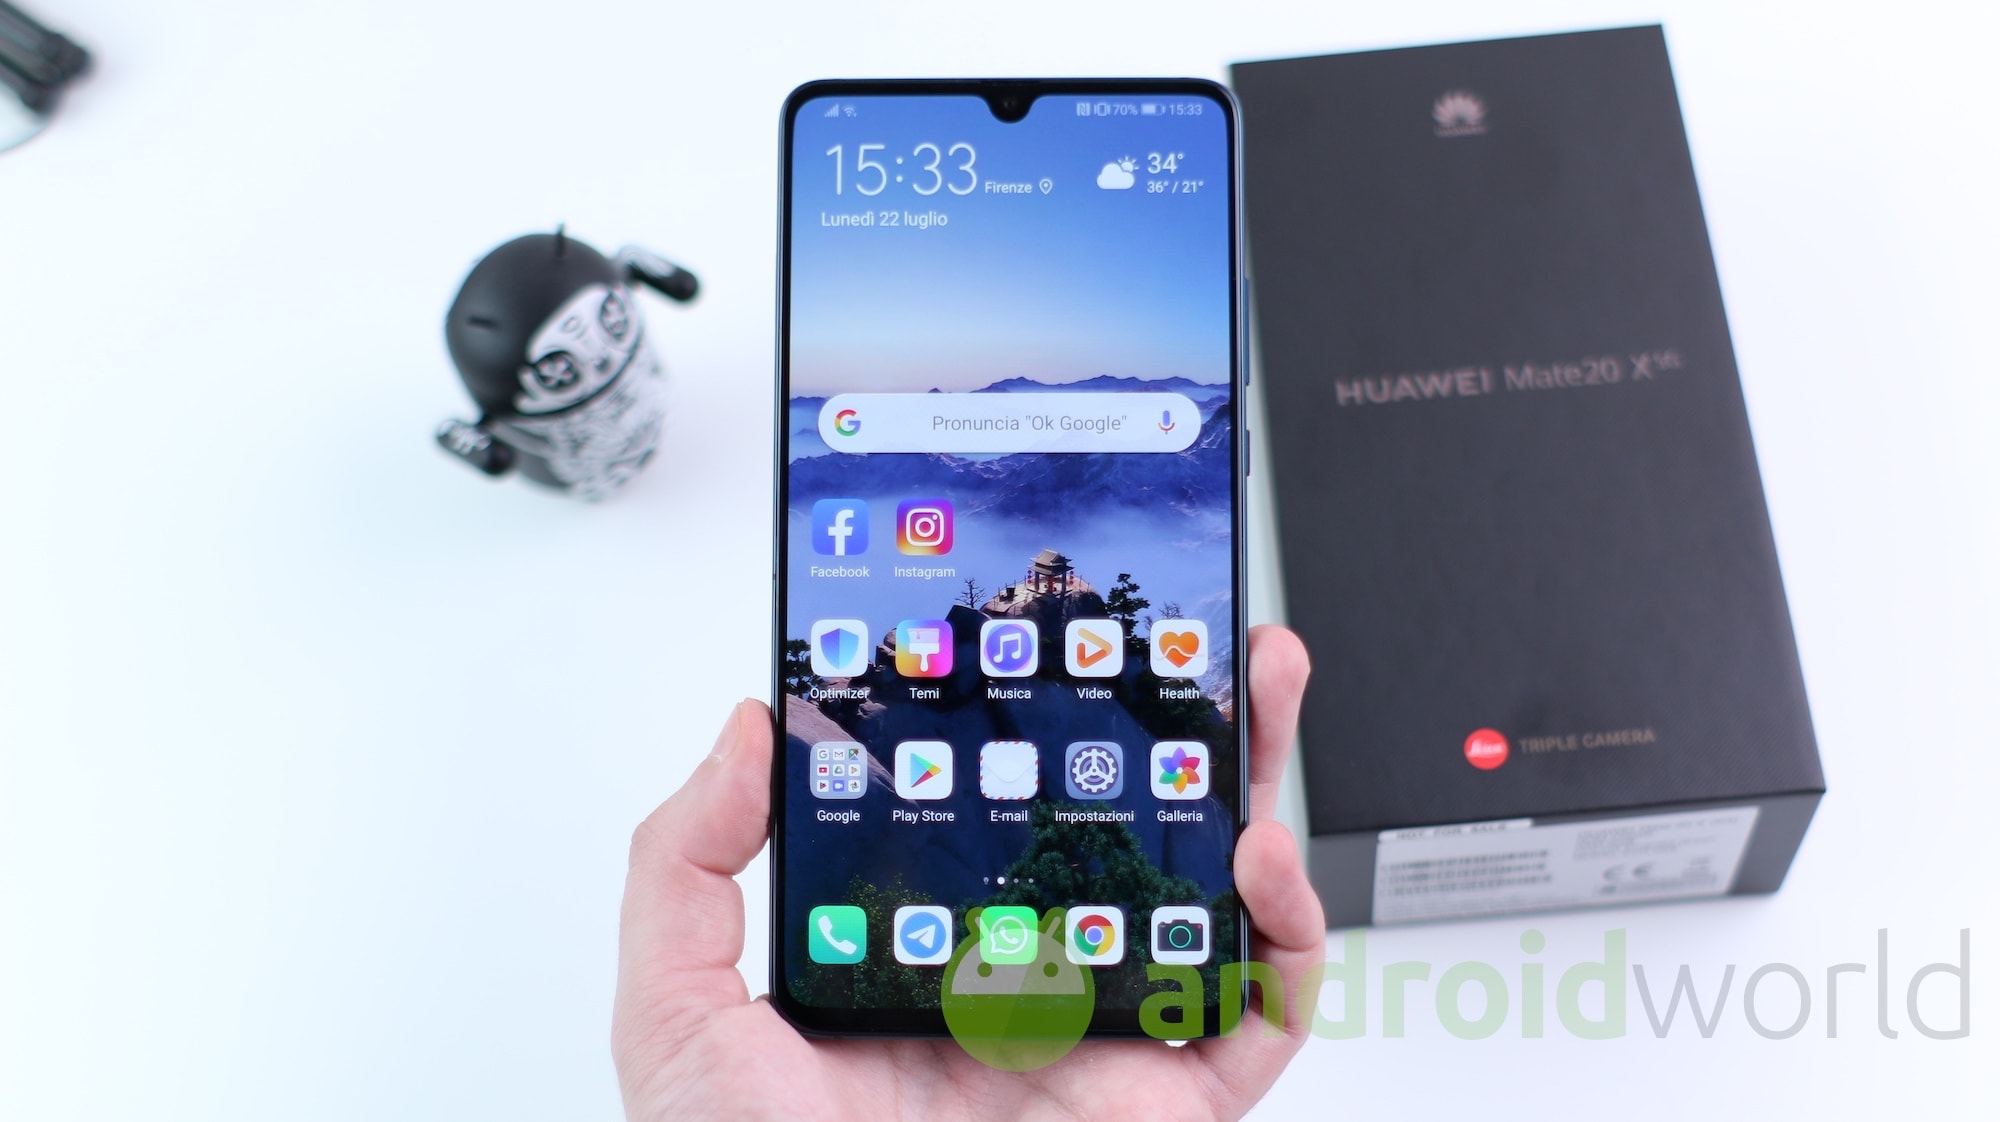 Nuovo anno, nuovo OS: Huawei Mate 20 X 5G riceve Android 10 in Europa! (foto)